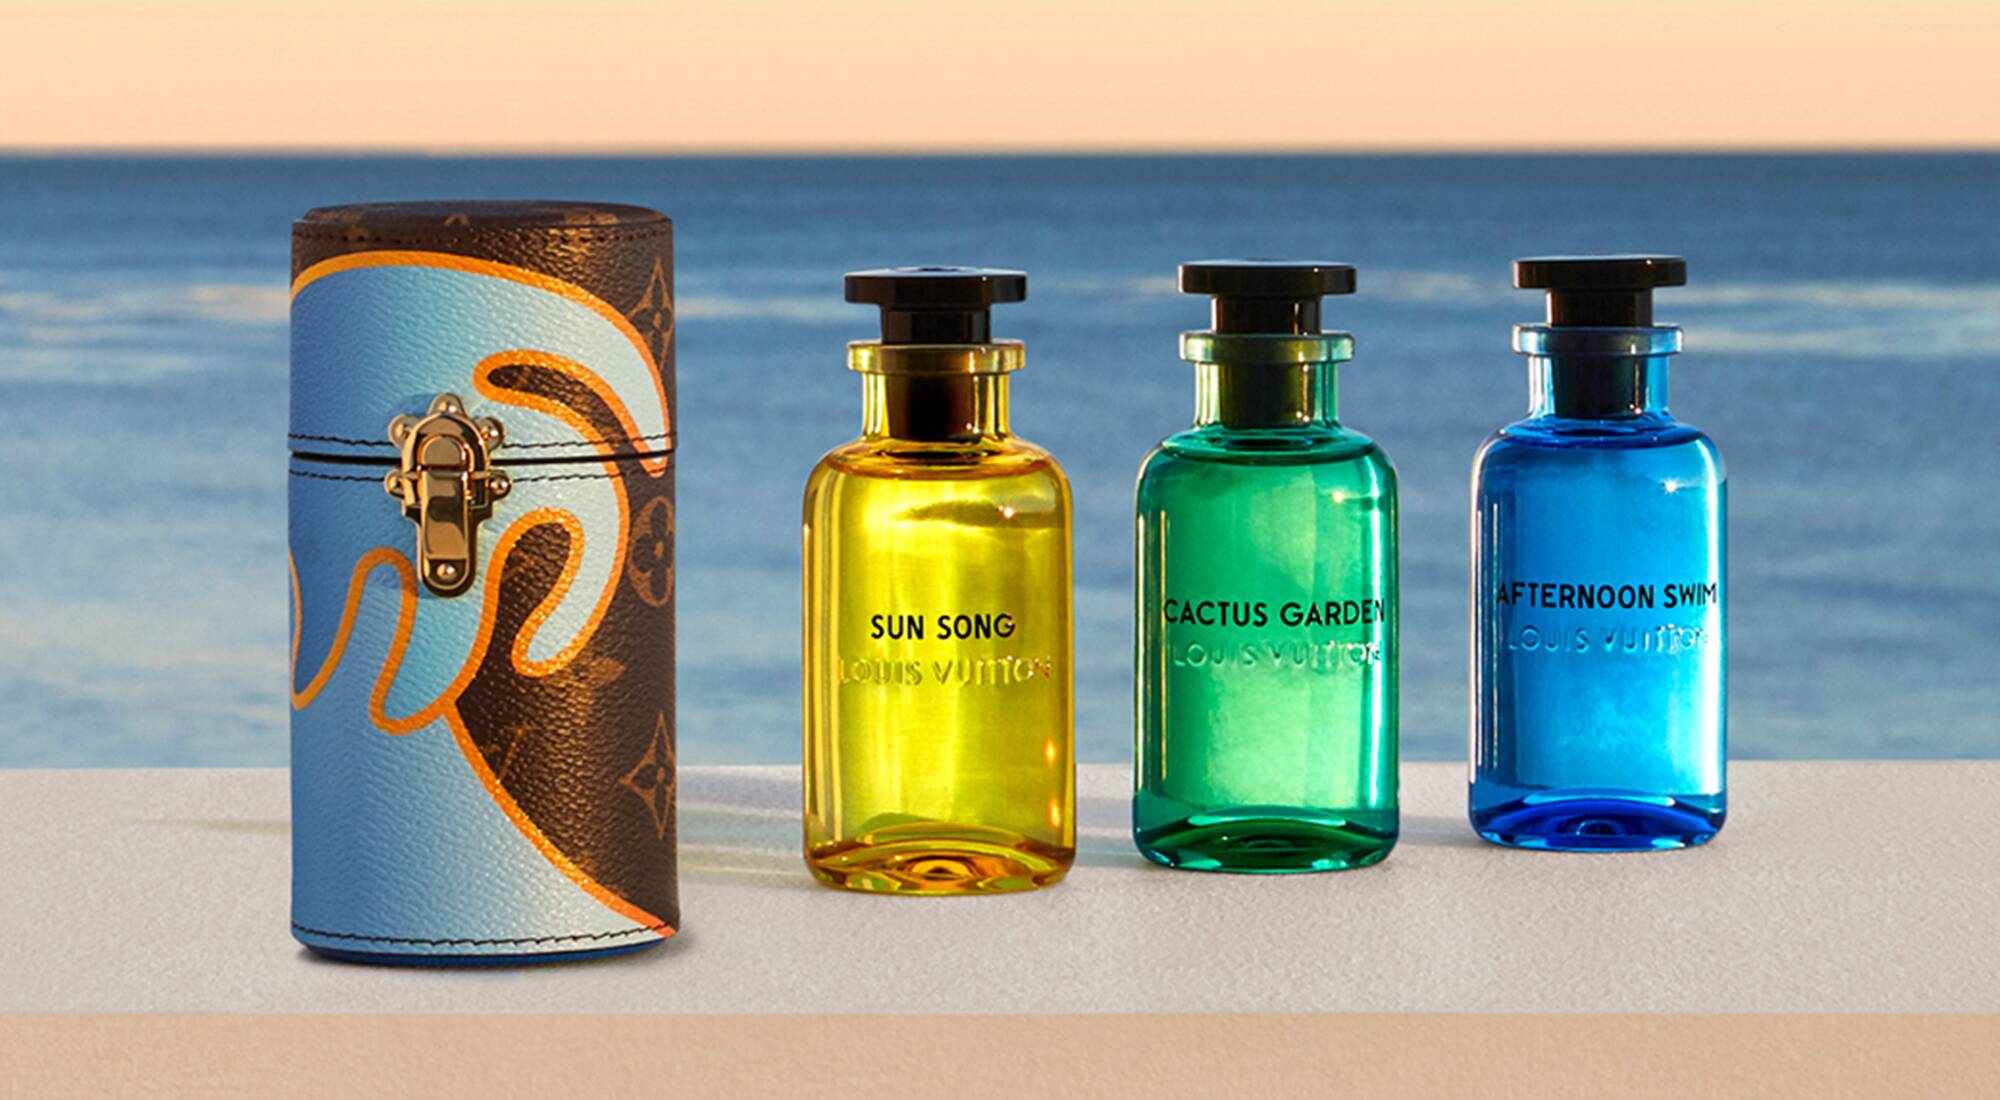 repertoire Våd pin Sun Song, Cactus Garden and Afternoon Swim, three new fragrance creations  from Louis Vuitton inspired by California summer - LVMH